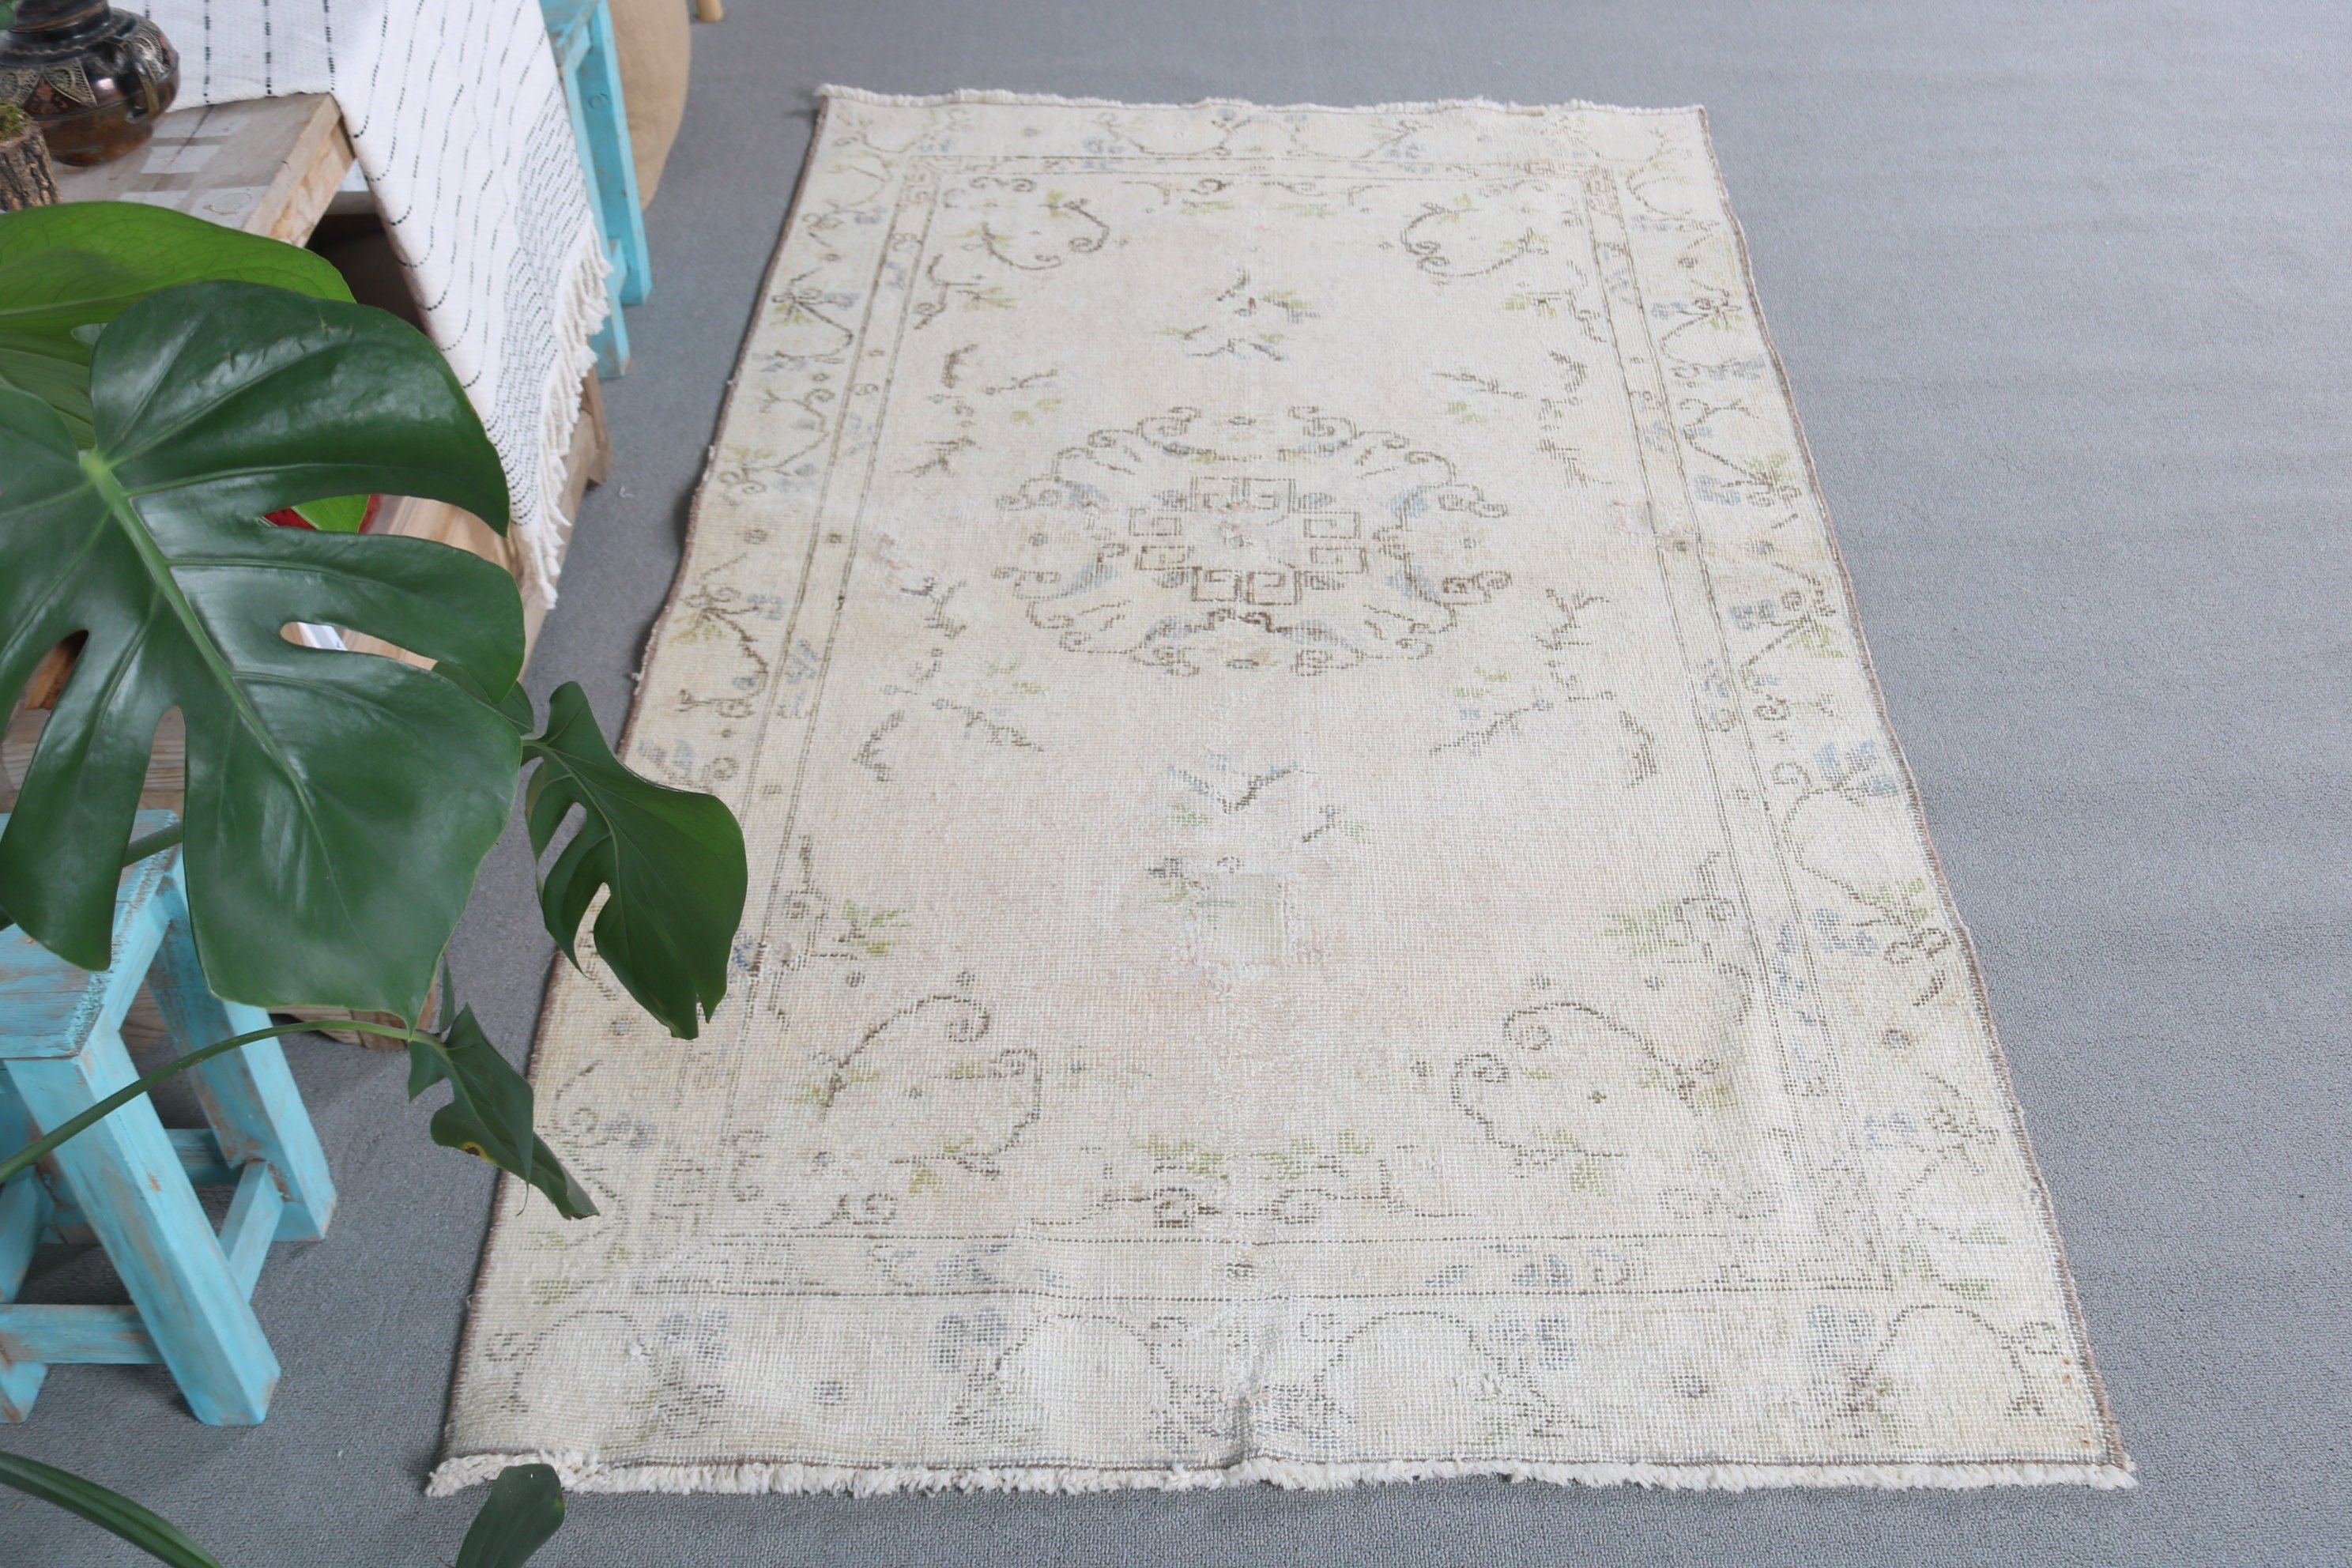 Turkish Rugs, Entry Rug, Decorative Rug, Rugs for Bedroom, Bedroom Rugs, 3.6x6.4 ft Accent Rugs, Cool Rugs, White Oushak Rug, Vintage Rug